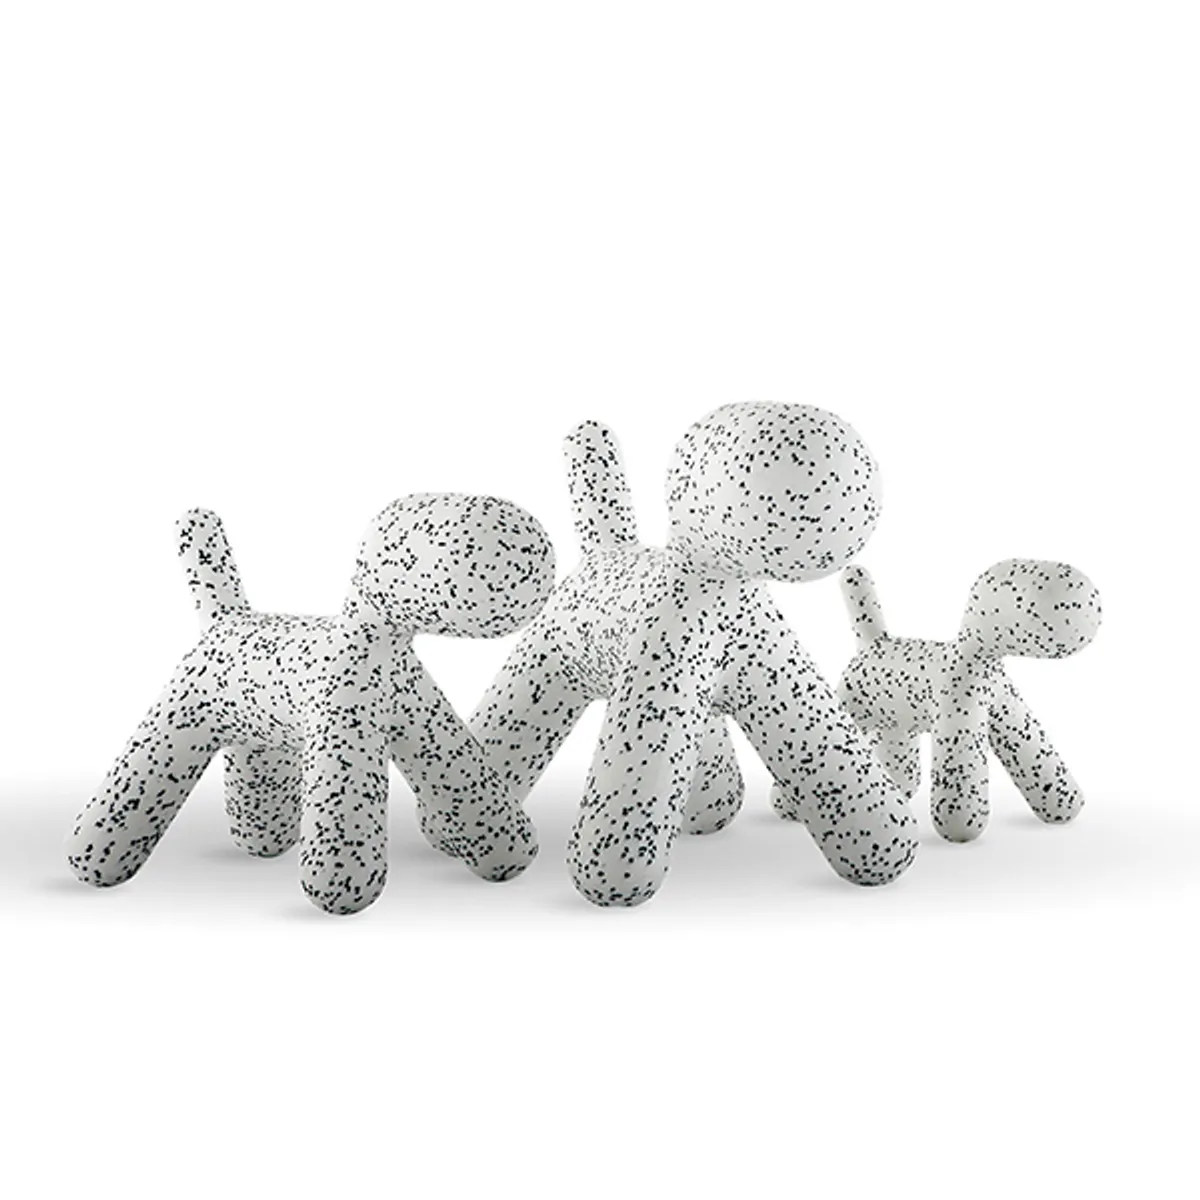 Puppy Chair Dalmation Finish Inside Out Contracts